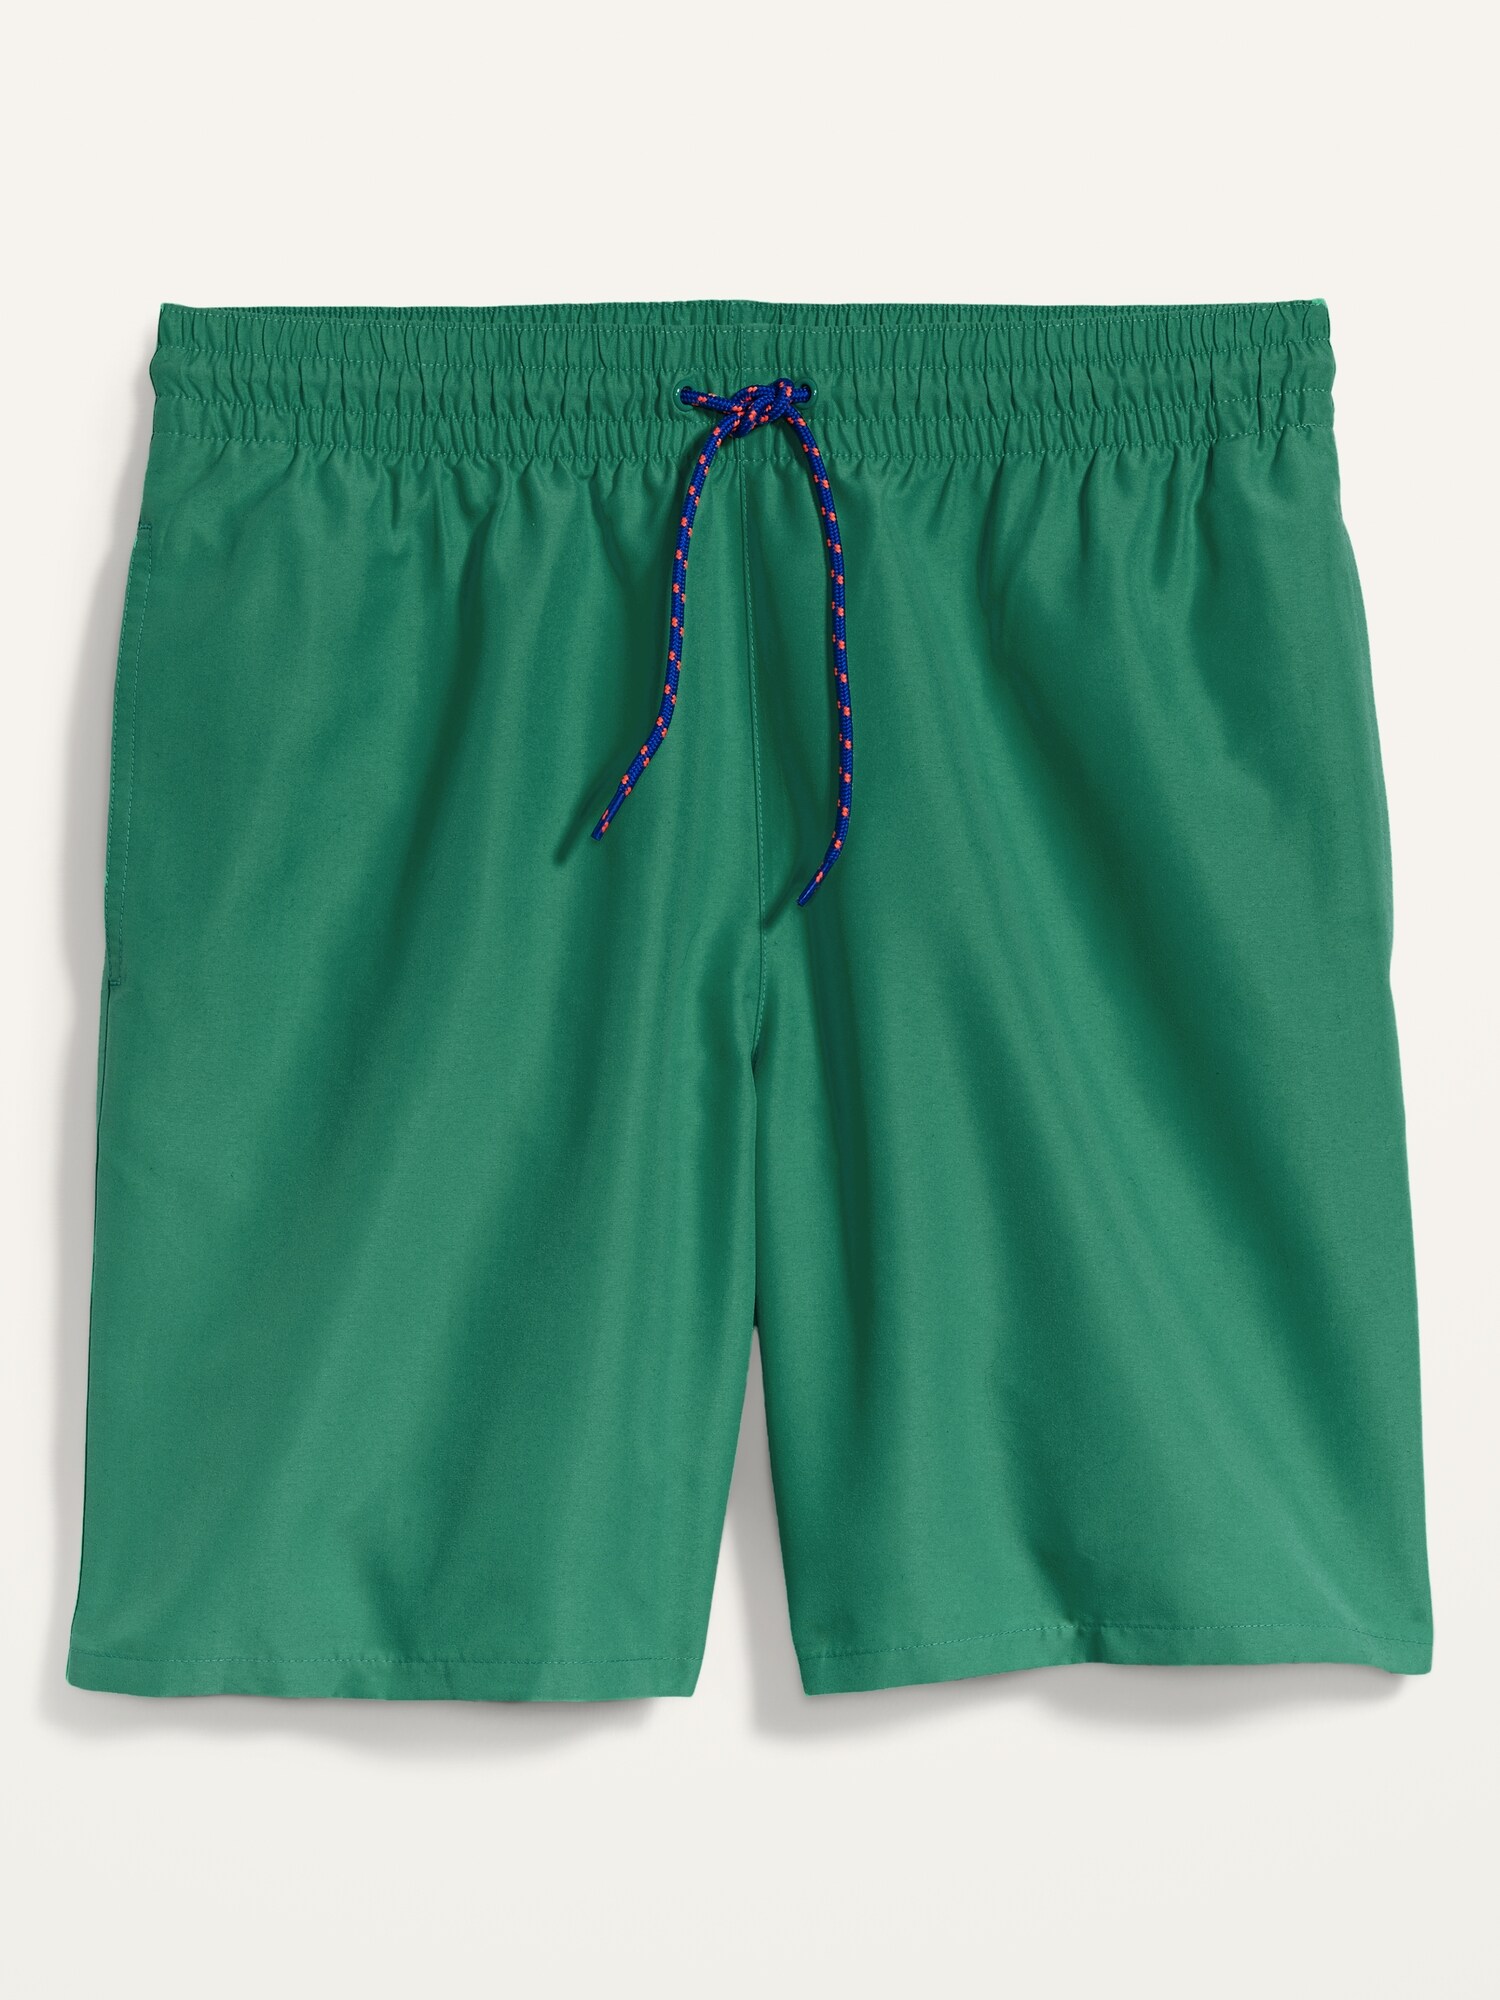 Solid-Color Swim Trunks for Men -- 8-inch inseam | Old Navy